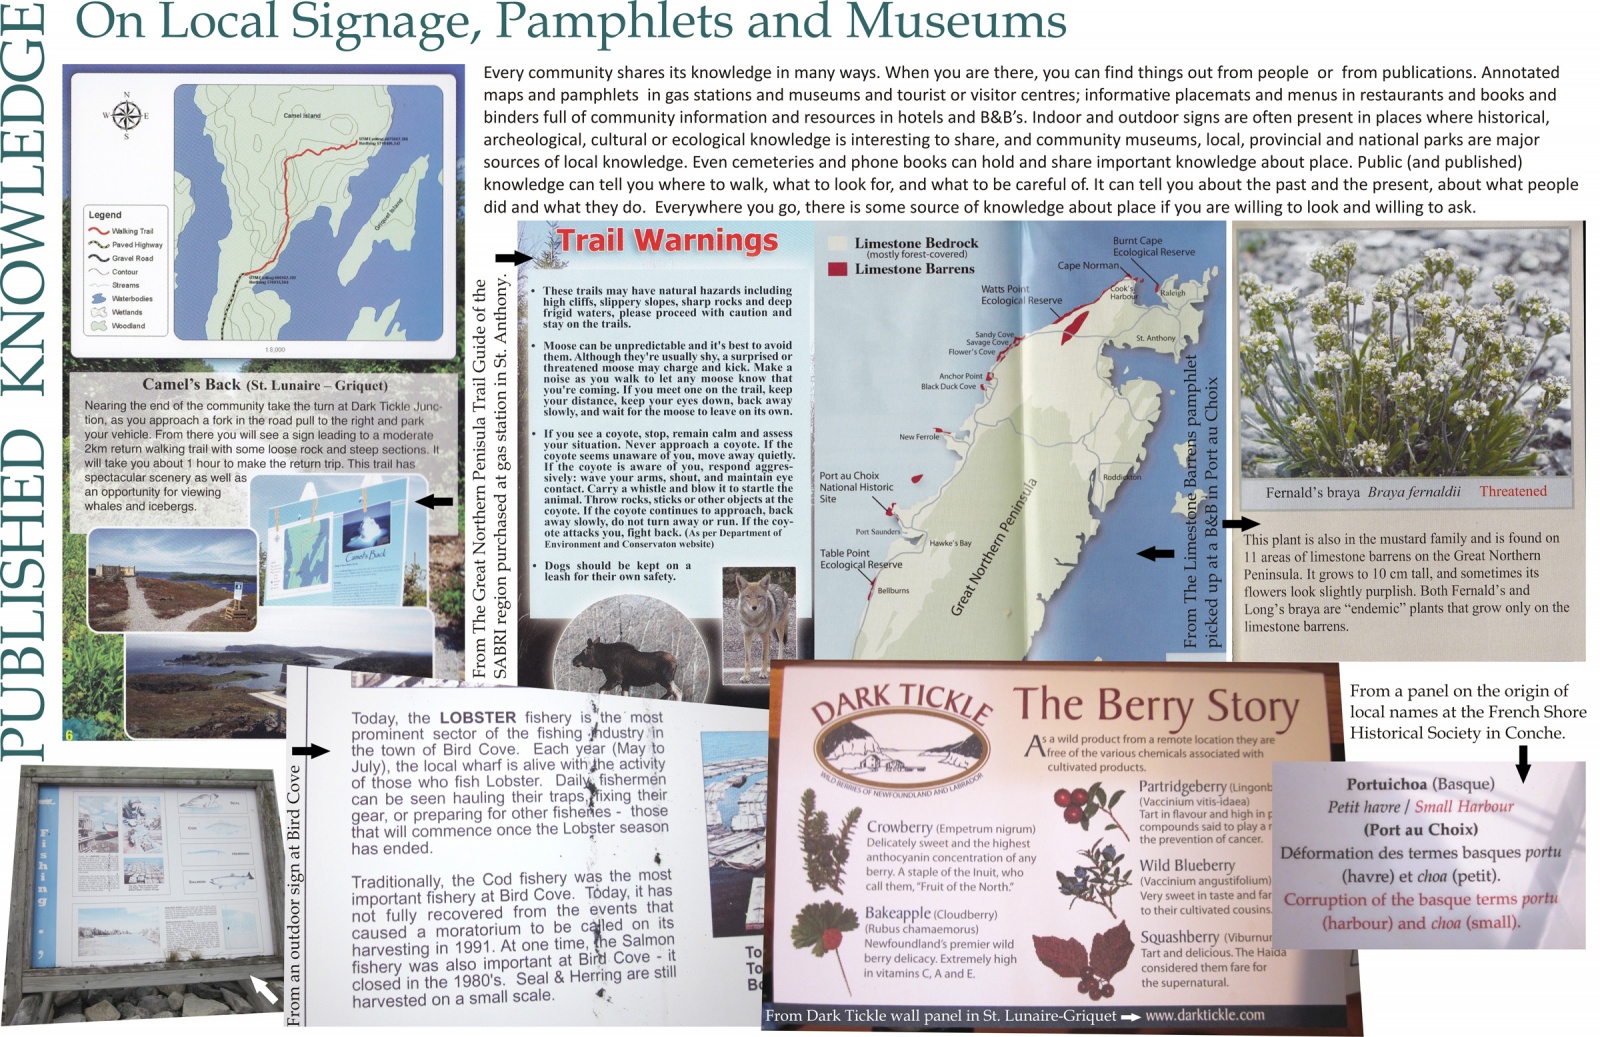 Published Knowledge: On Local Signage, Pamphlets and Museums